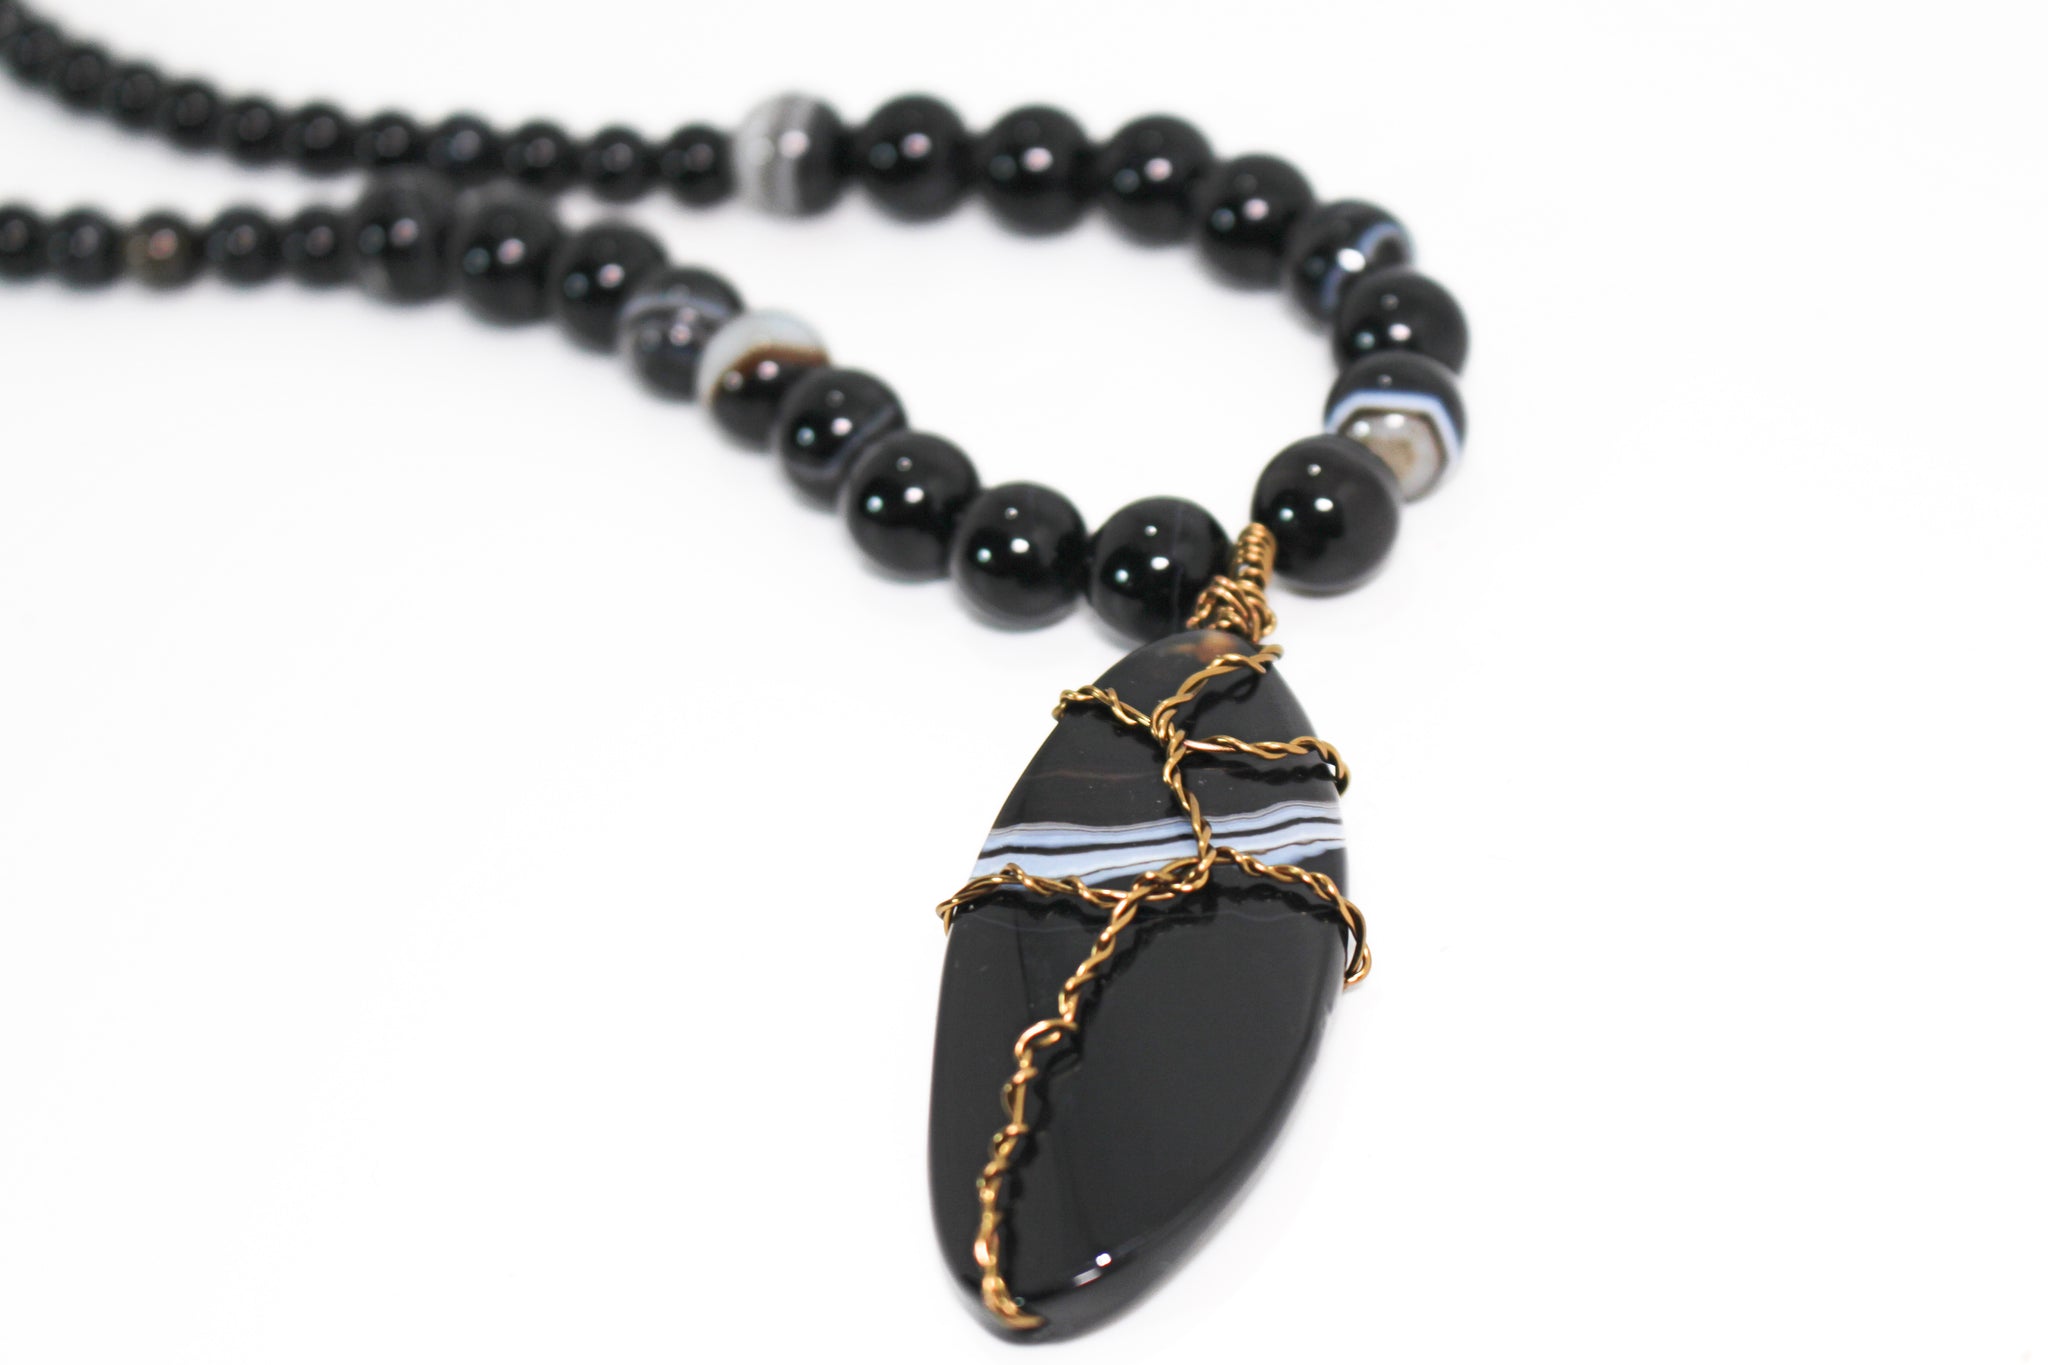 KD-0104 Black Onyx Agate 20 Inch Necklace w/ Wire Wrapped Pendant